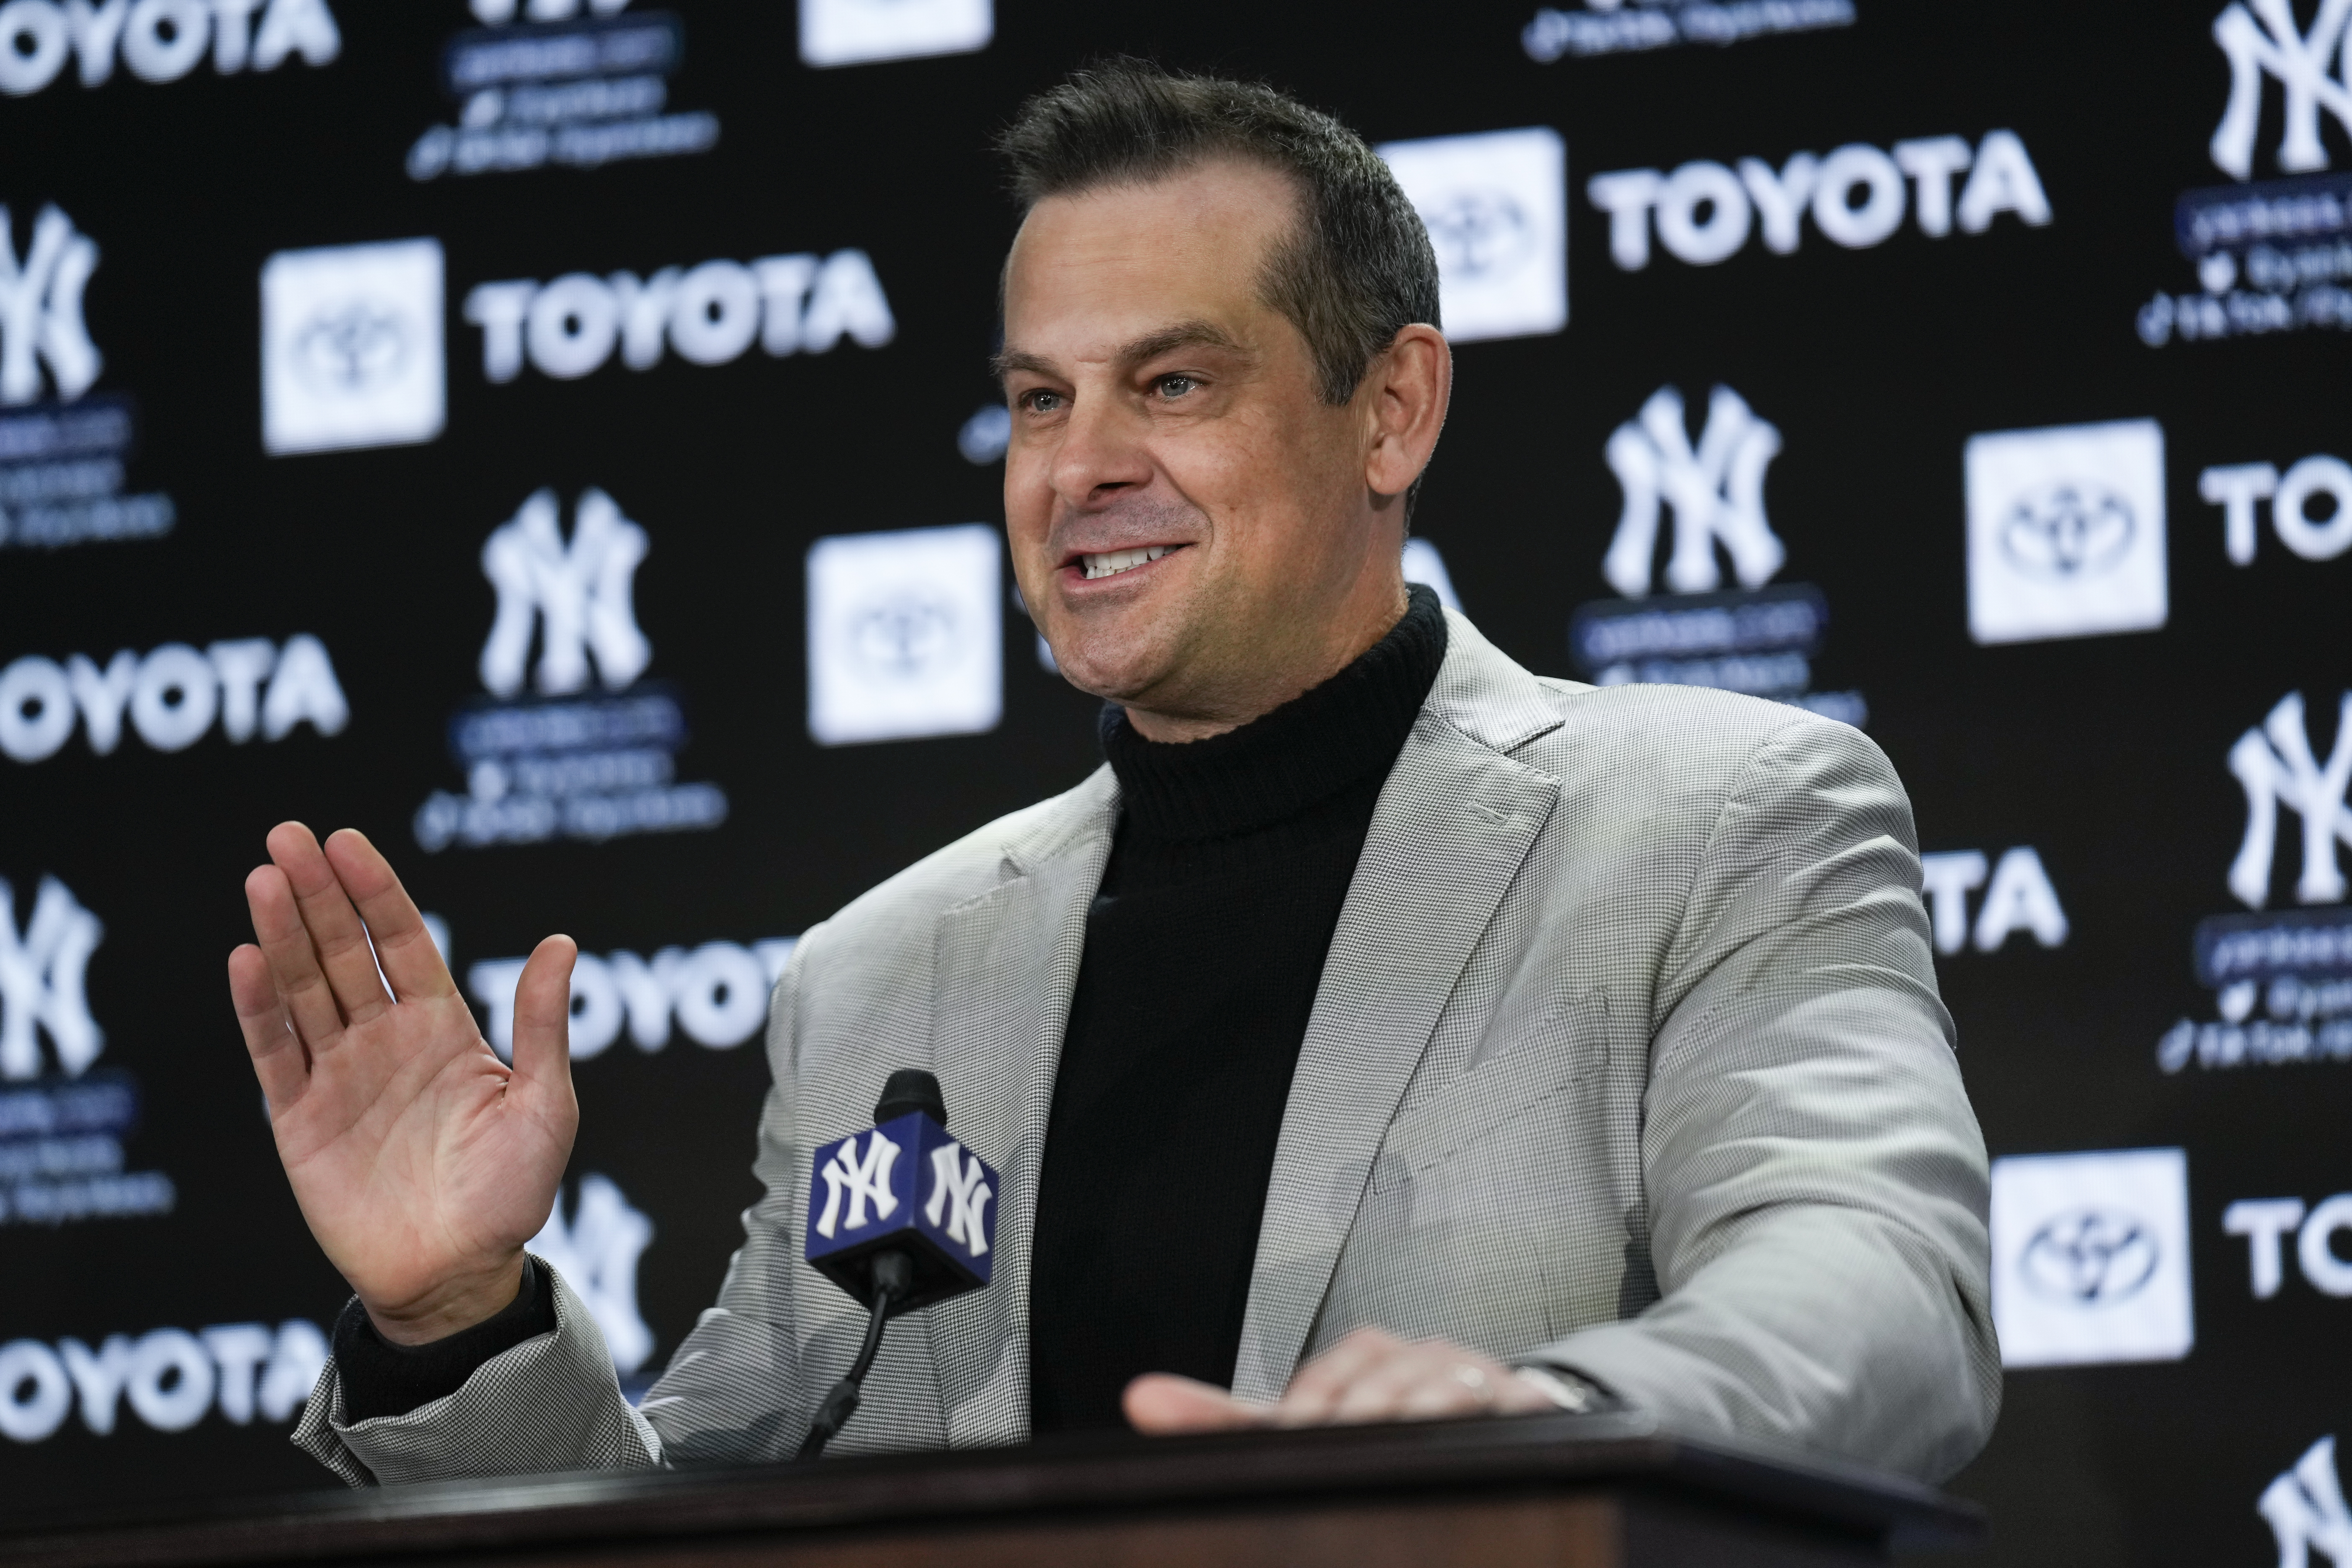 Yankees manager Aaron Boone ejected for 7th time this season, tied for most  in majors Ohio & Great Lakes News - Bally Sports